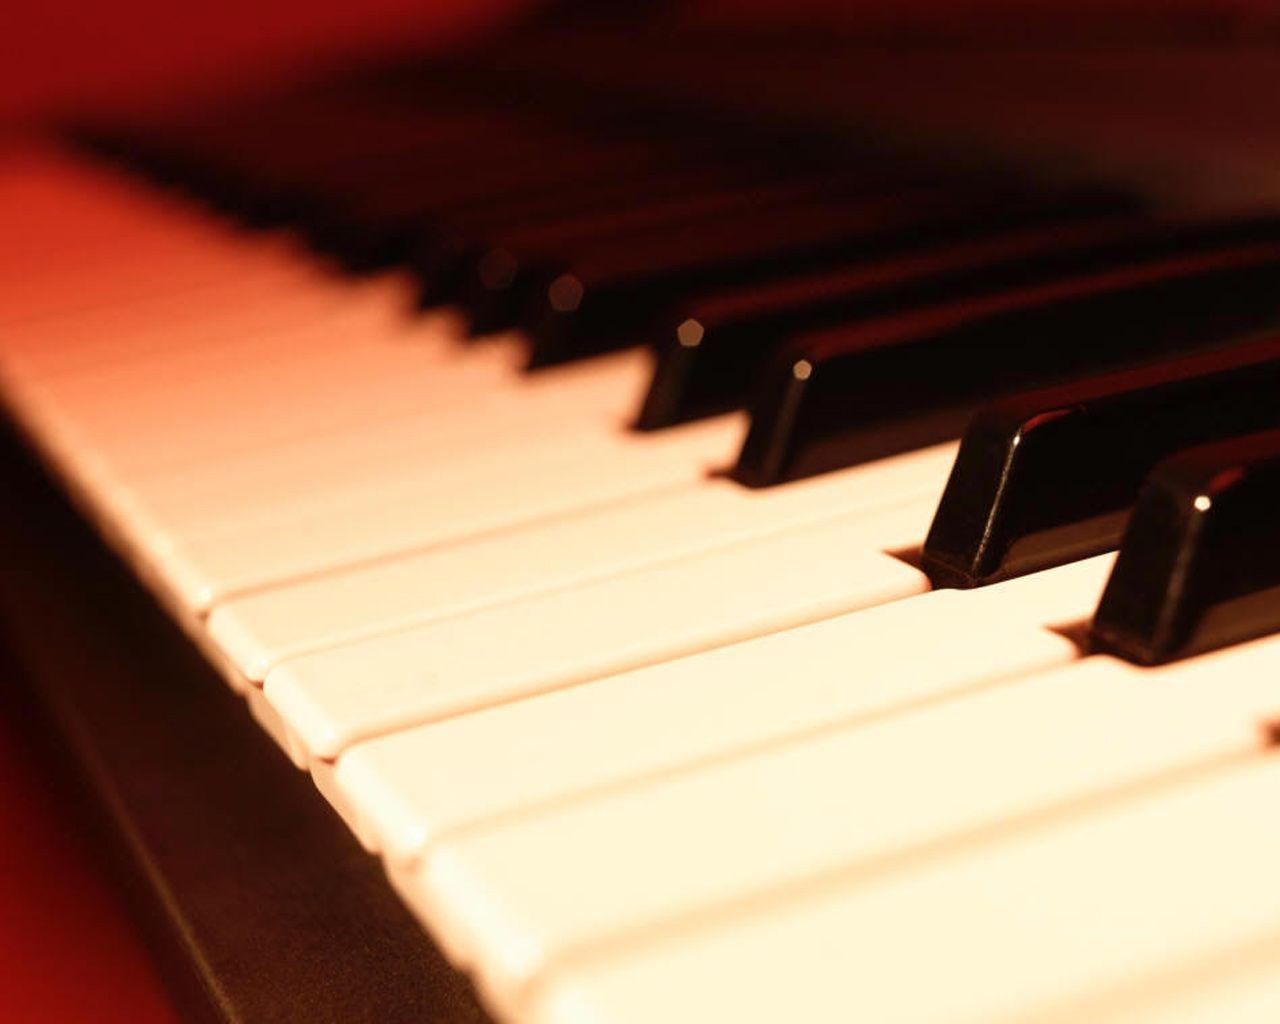 Piano Keys Wallpaper. Best Reviews About Audio And Gadgets